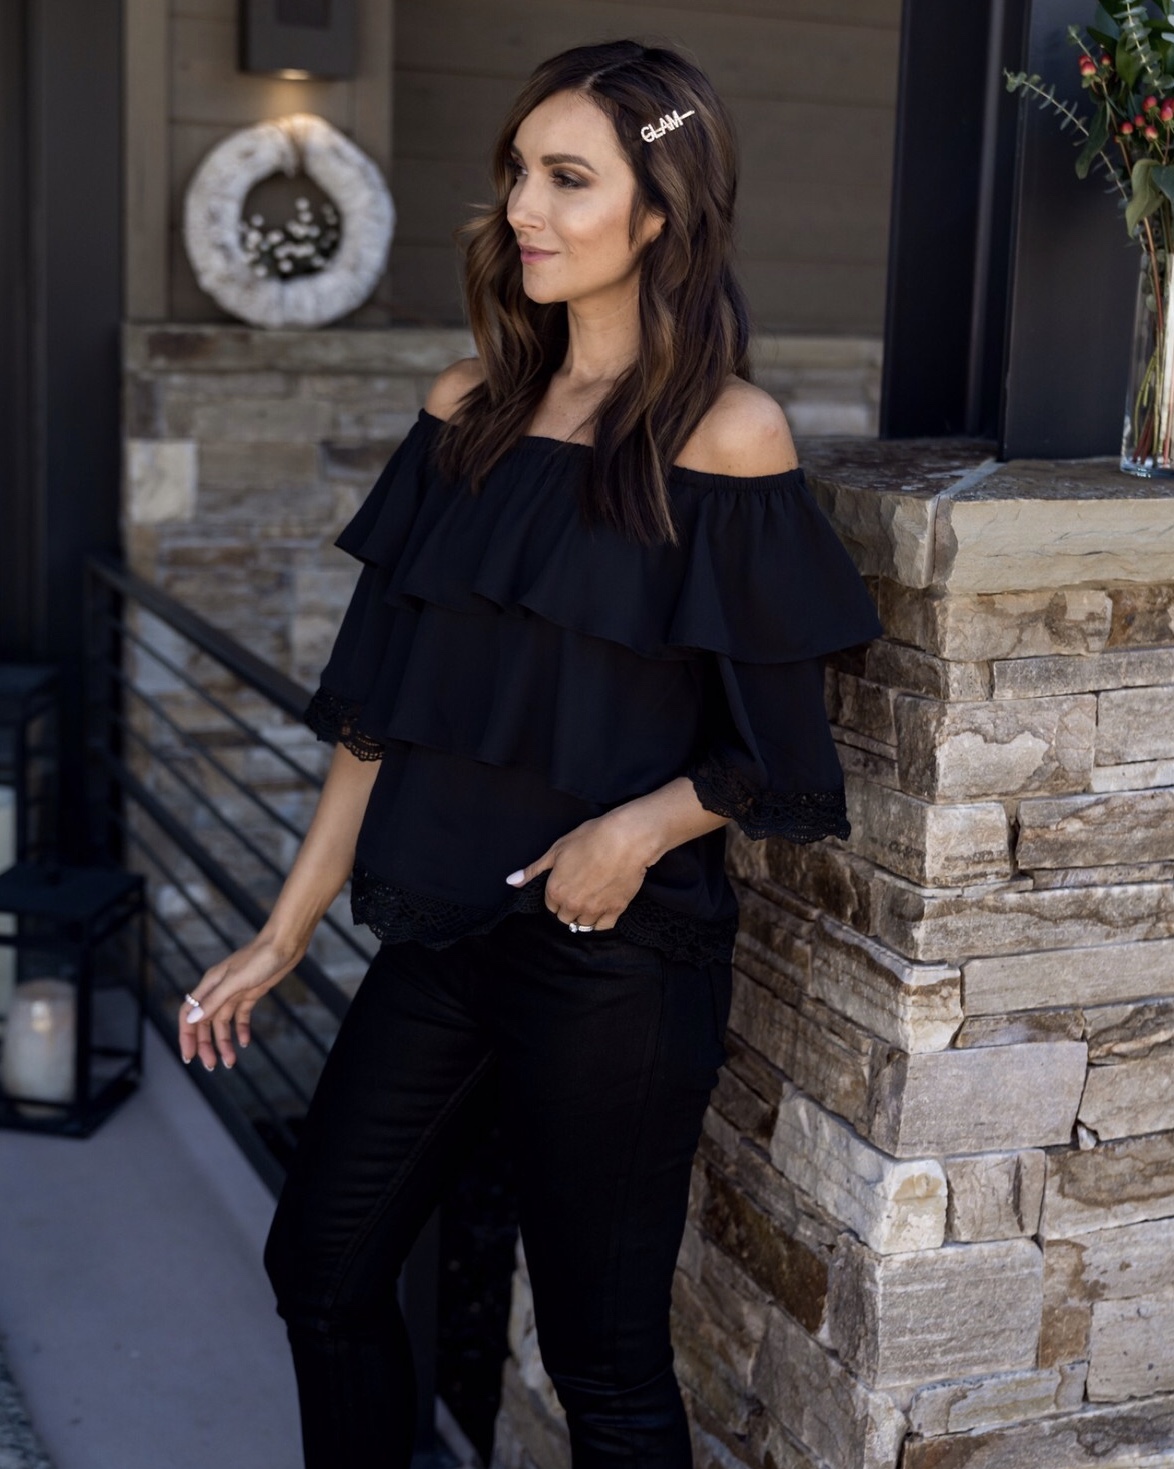 Off the shoulder top with skinny jeans, leggings